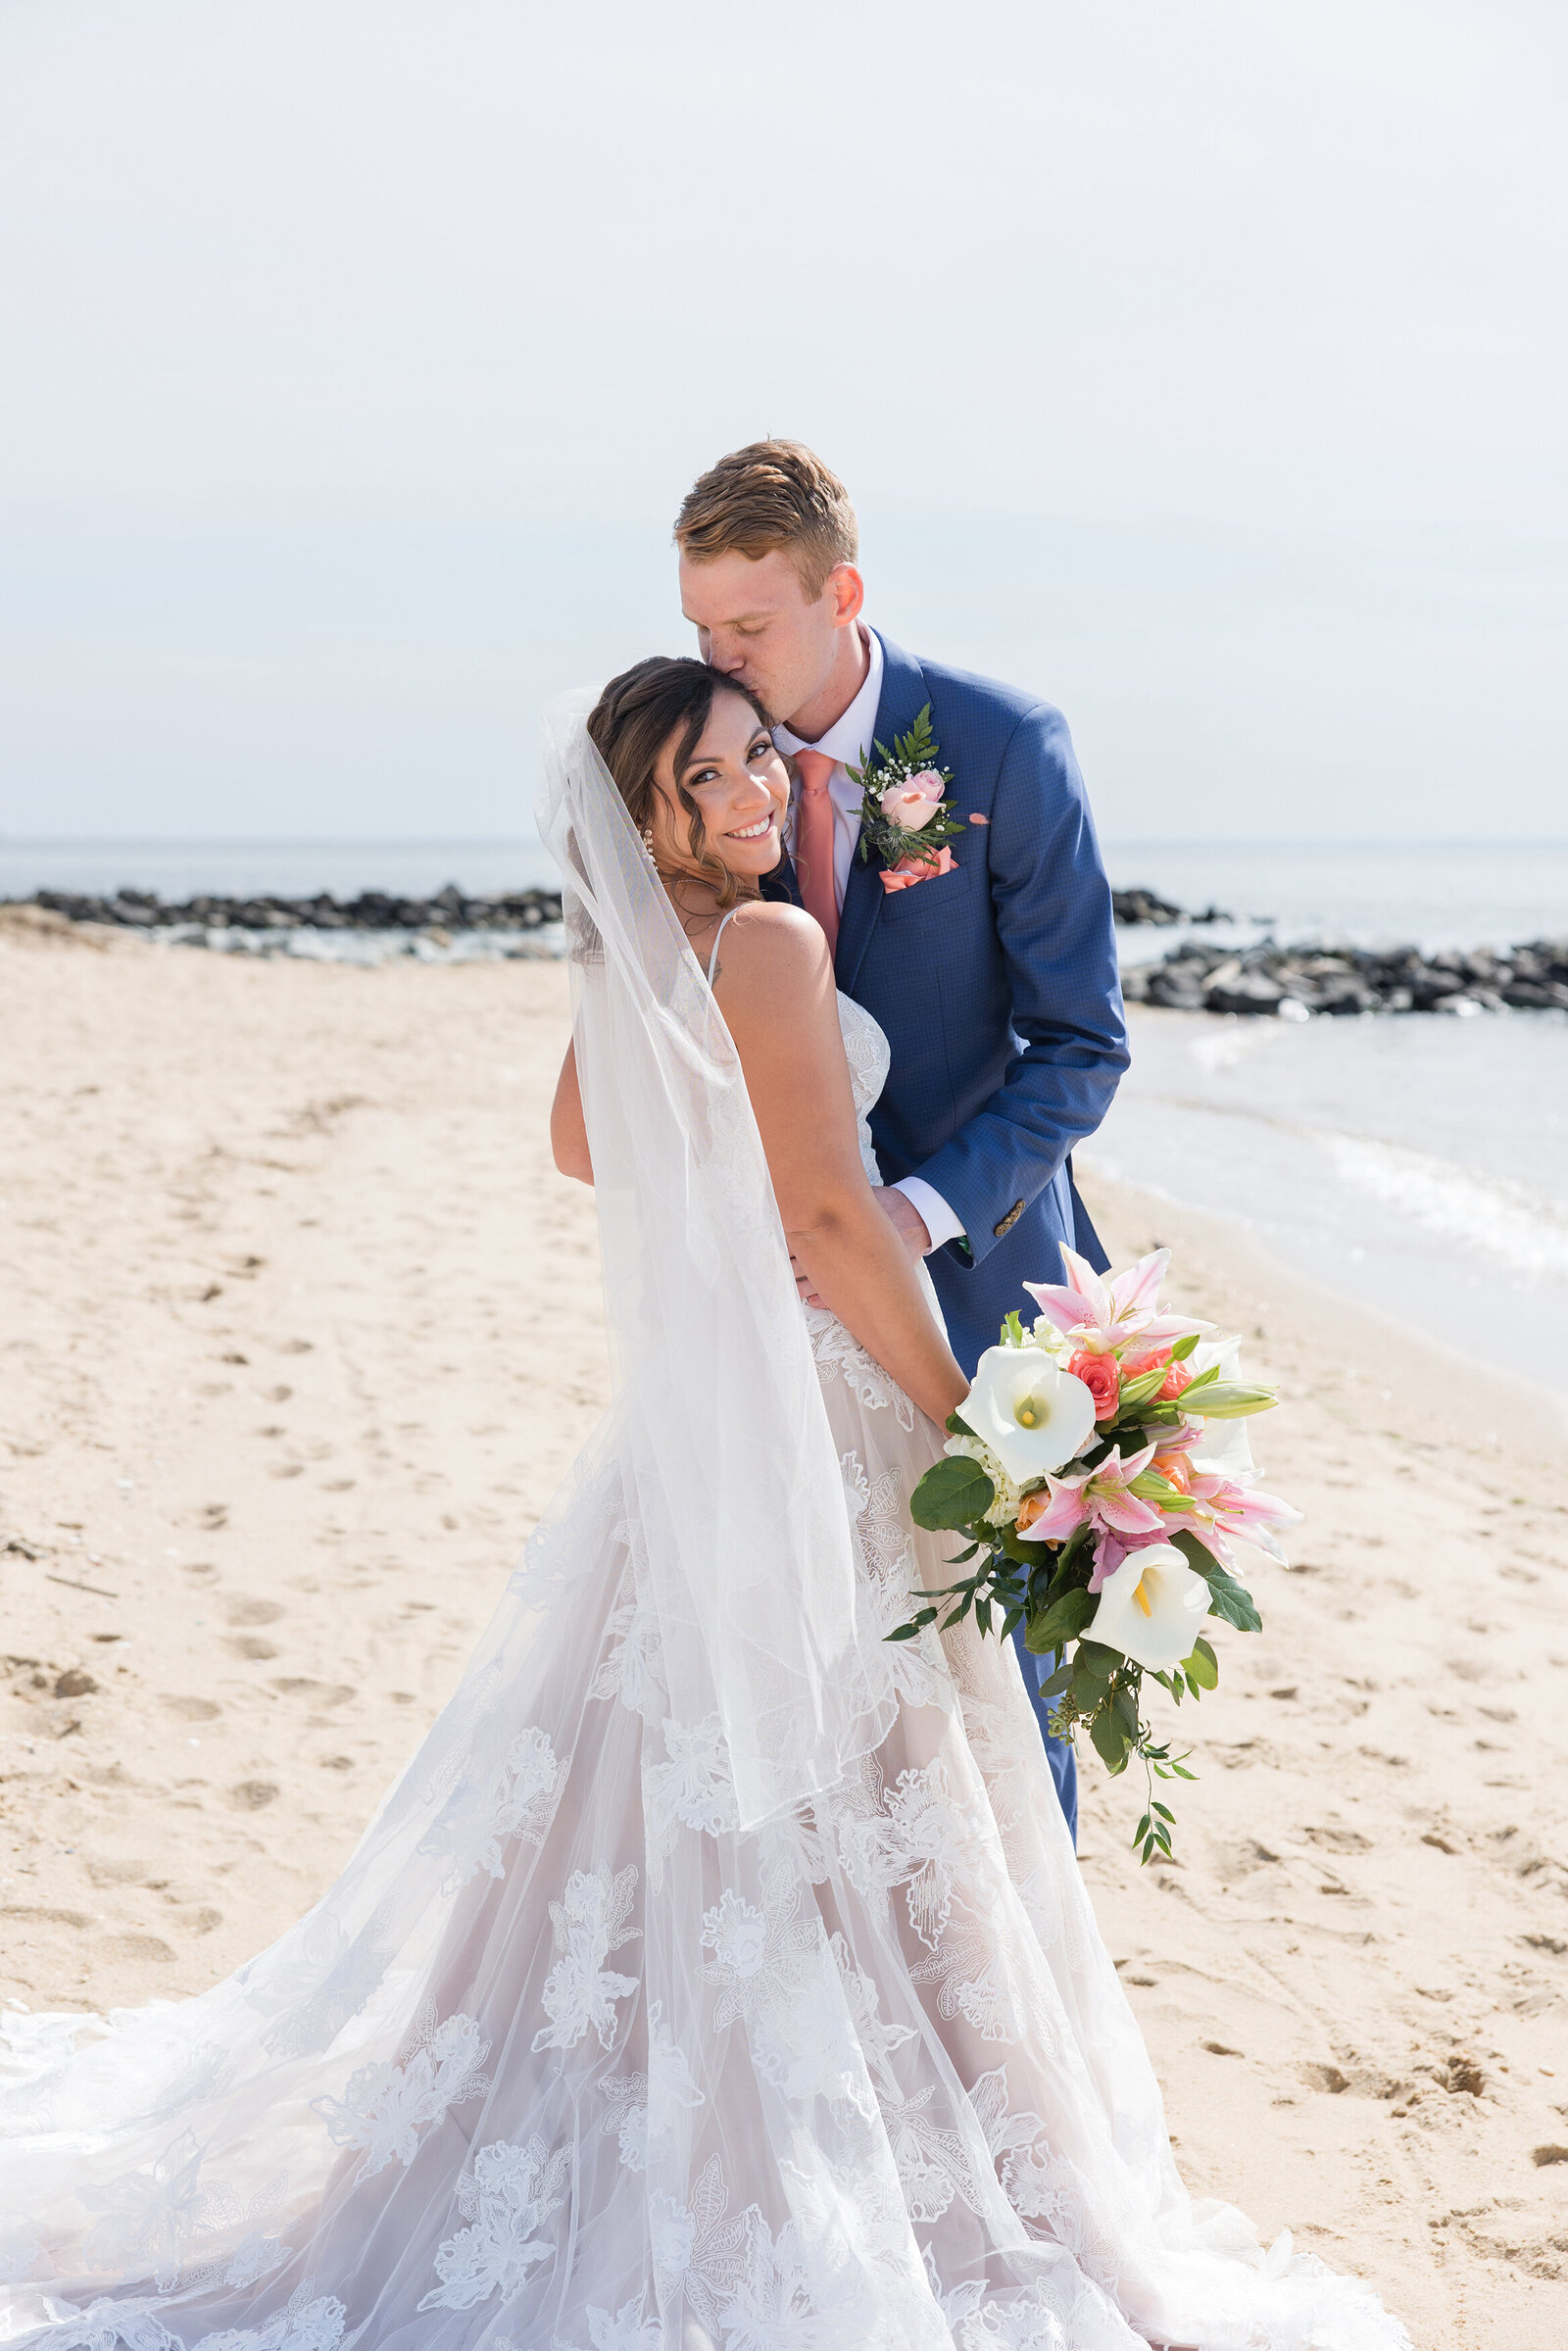 Silver Swan Bayside wedding photo of couple on beach in Stevensville, Maryland by Annapolis photographer Christa Rae Photography